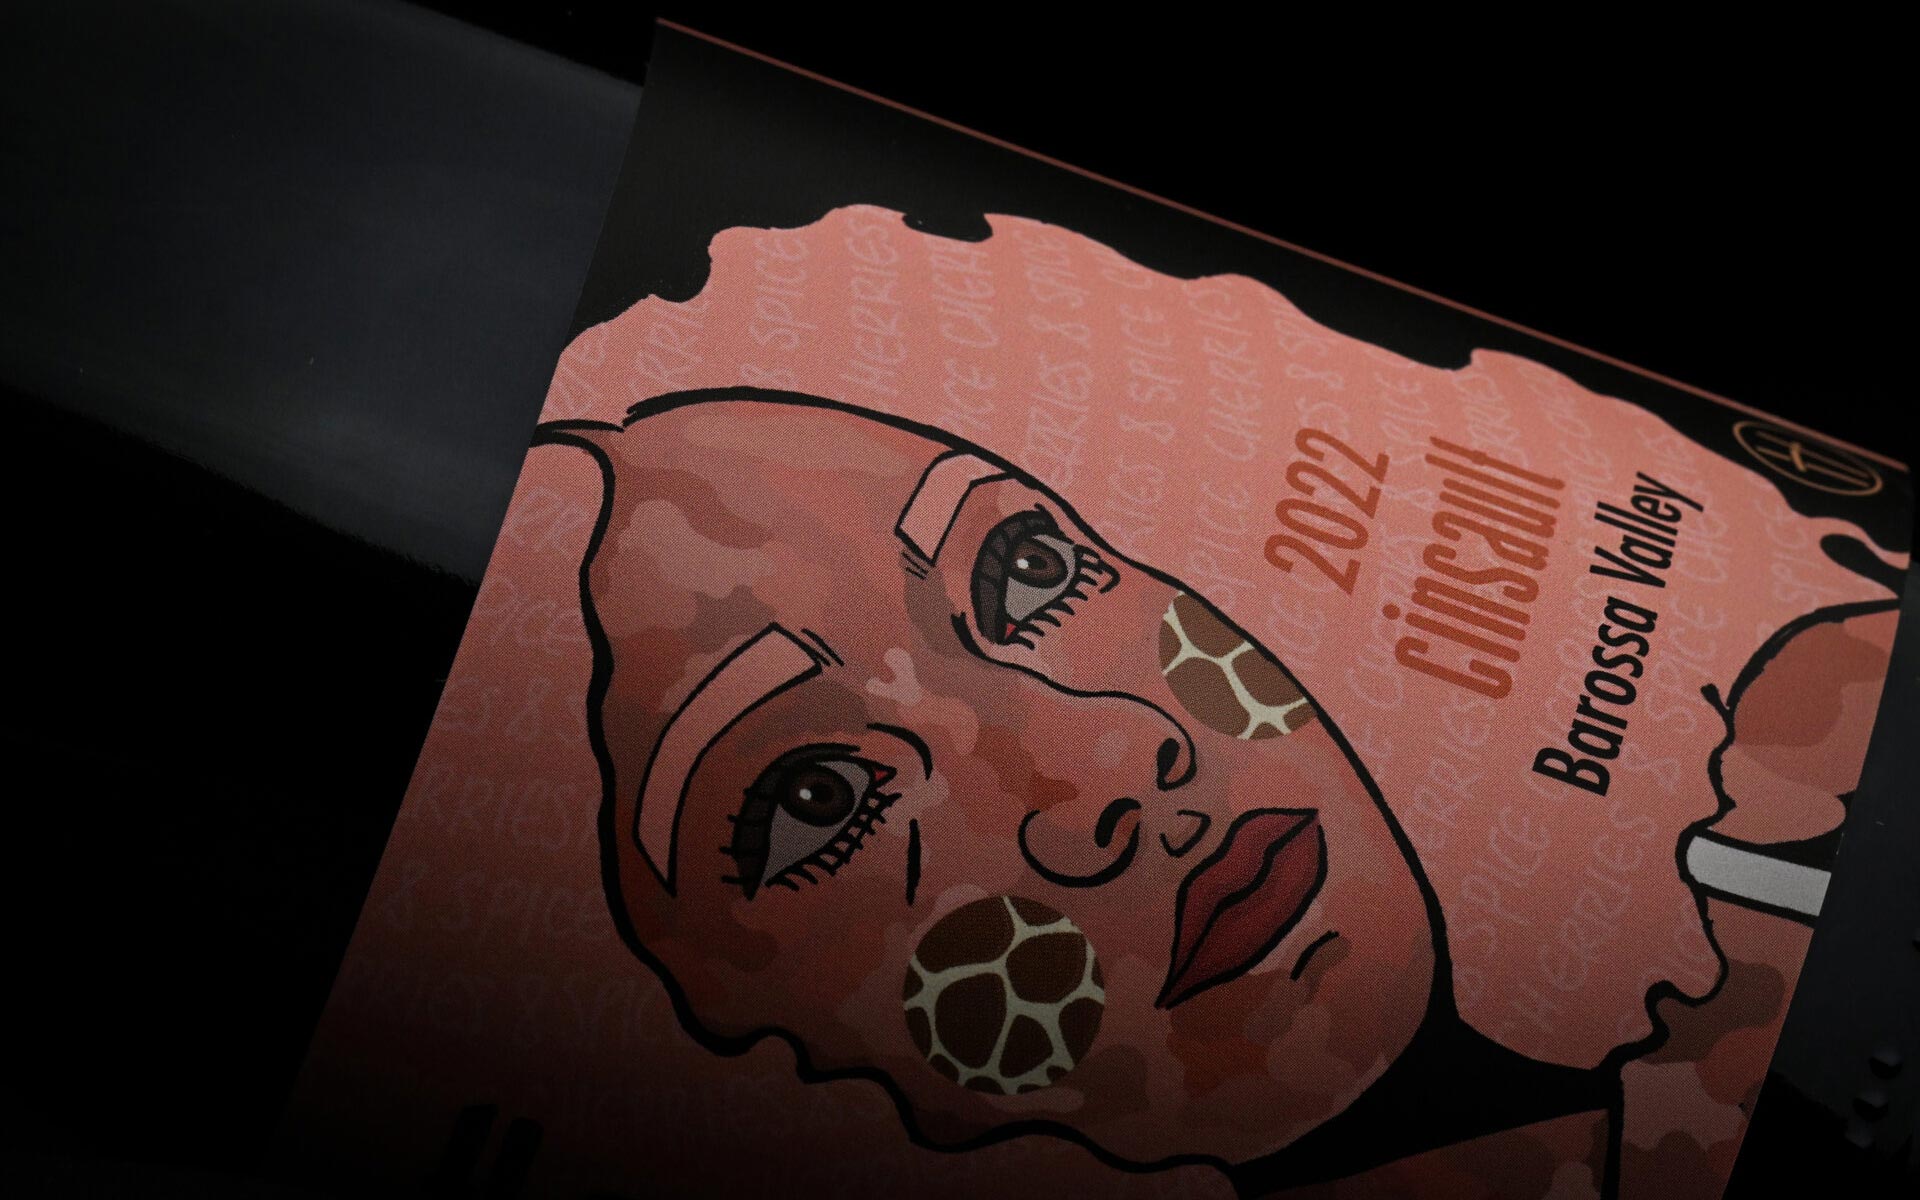 The Cutting Cinsault bottle lying on its side